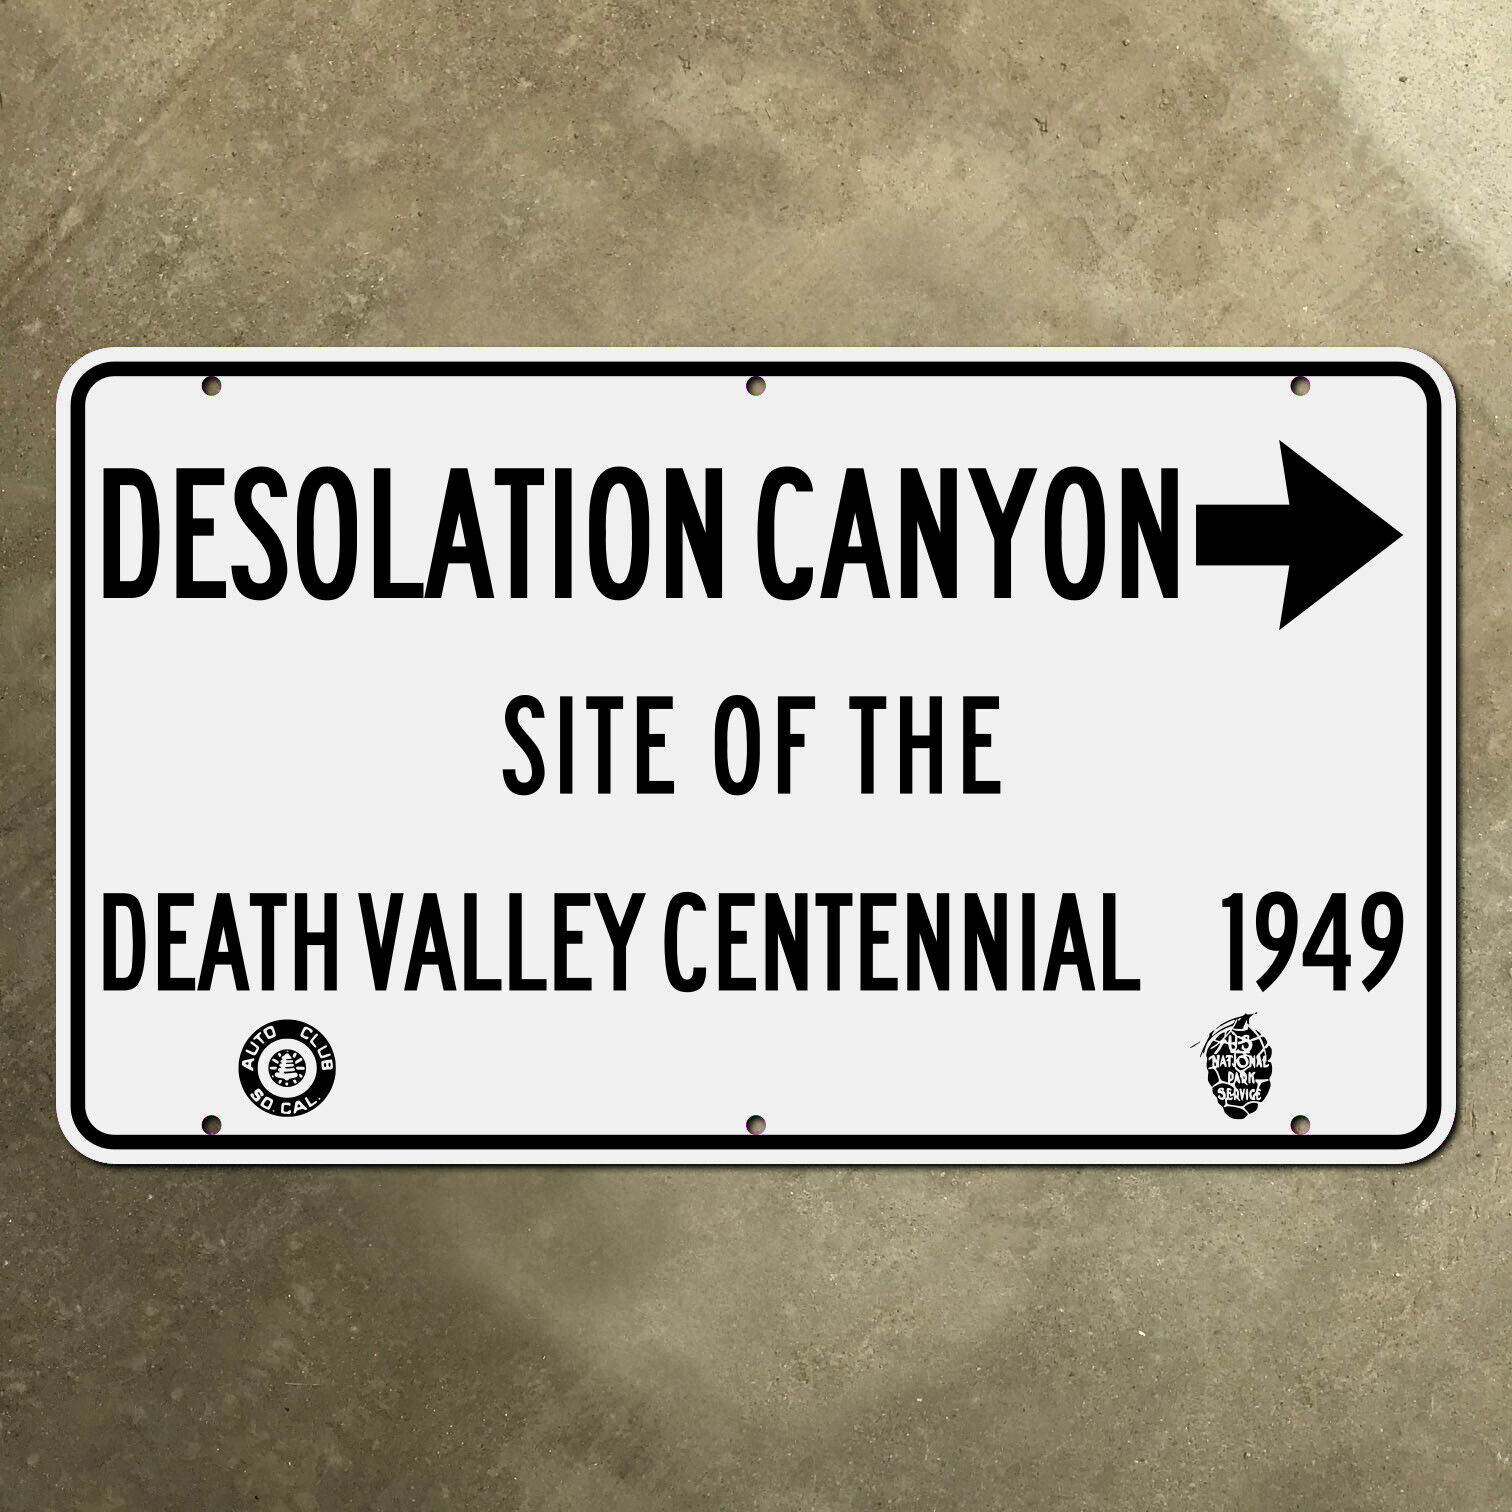 ACSC NPS Desolation Canyon highway sign Death Valley California 1949 49ers 15x9